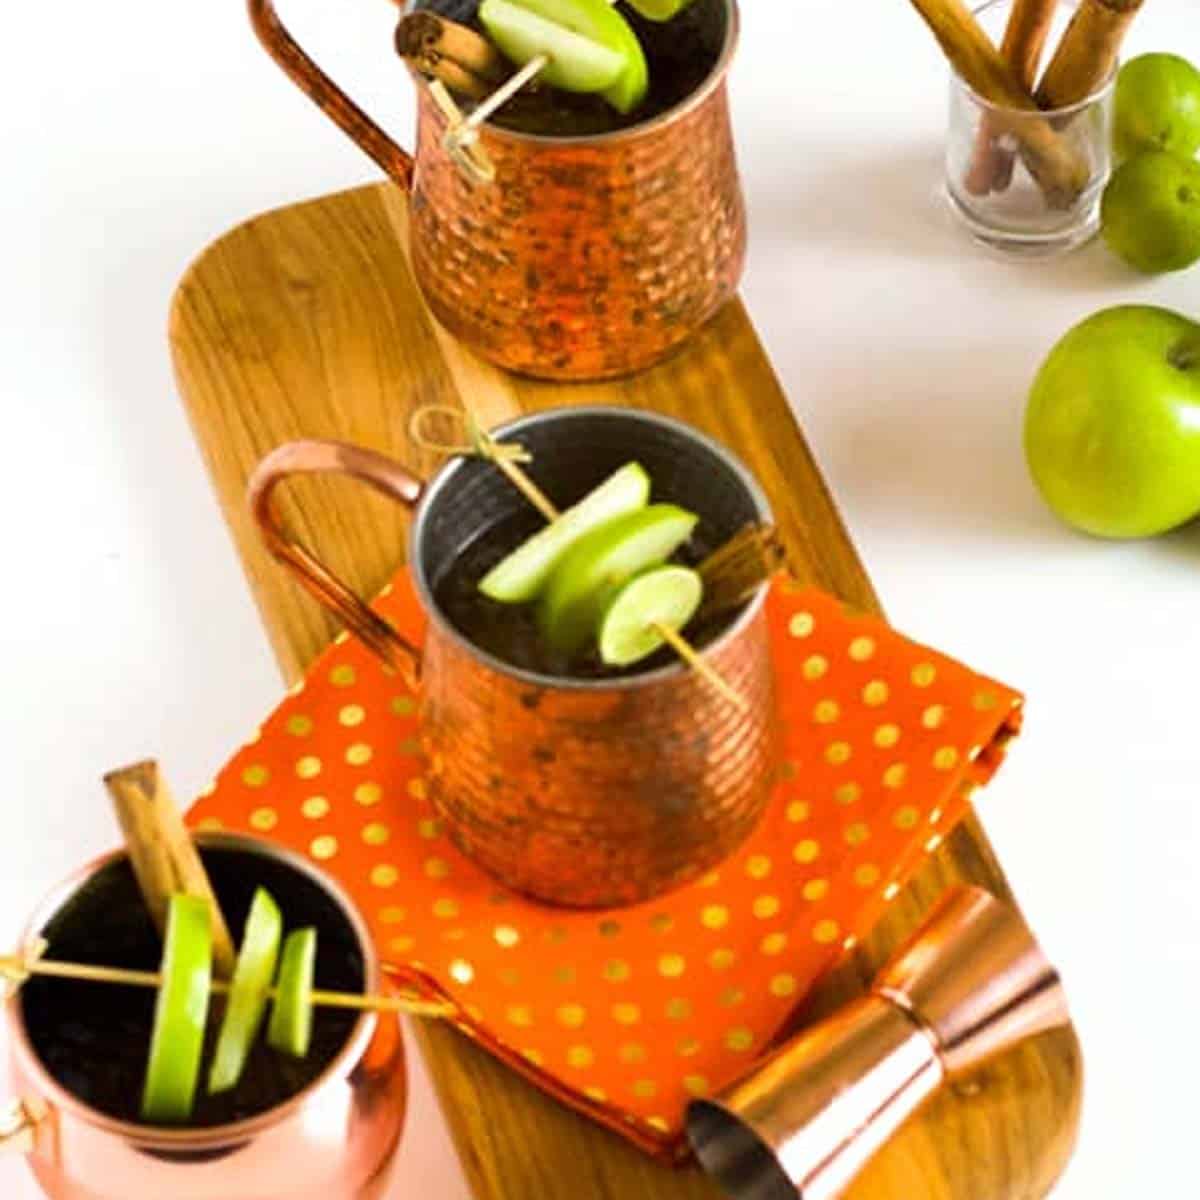 Apple cider moscow mule